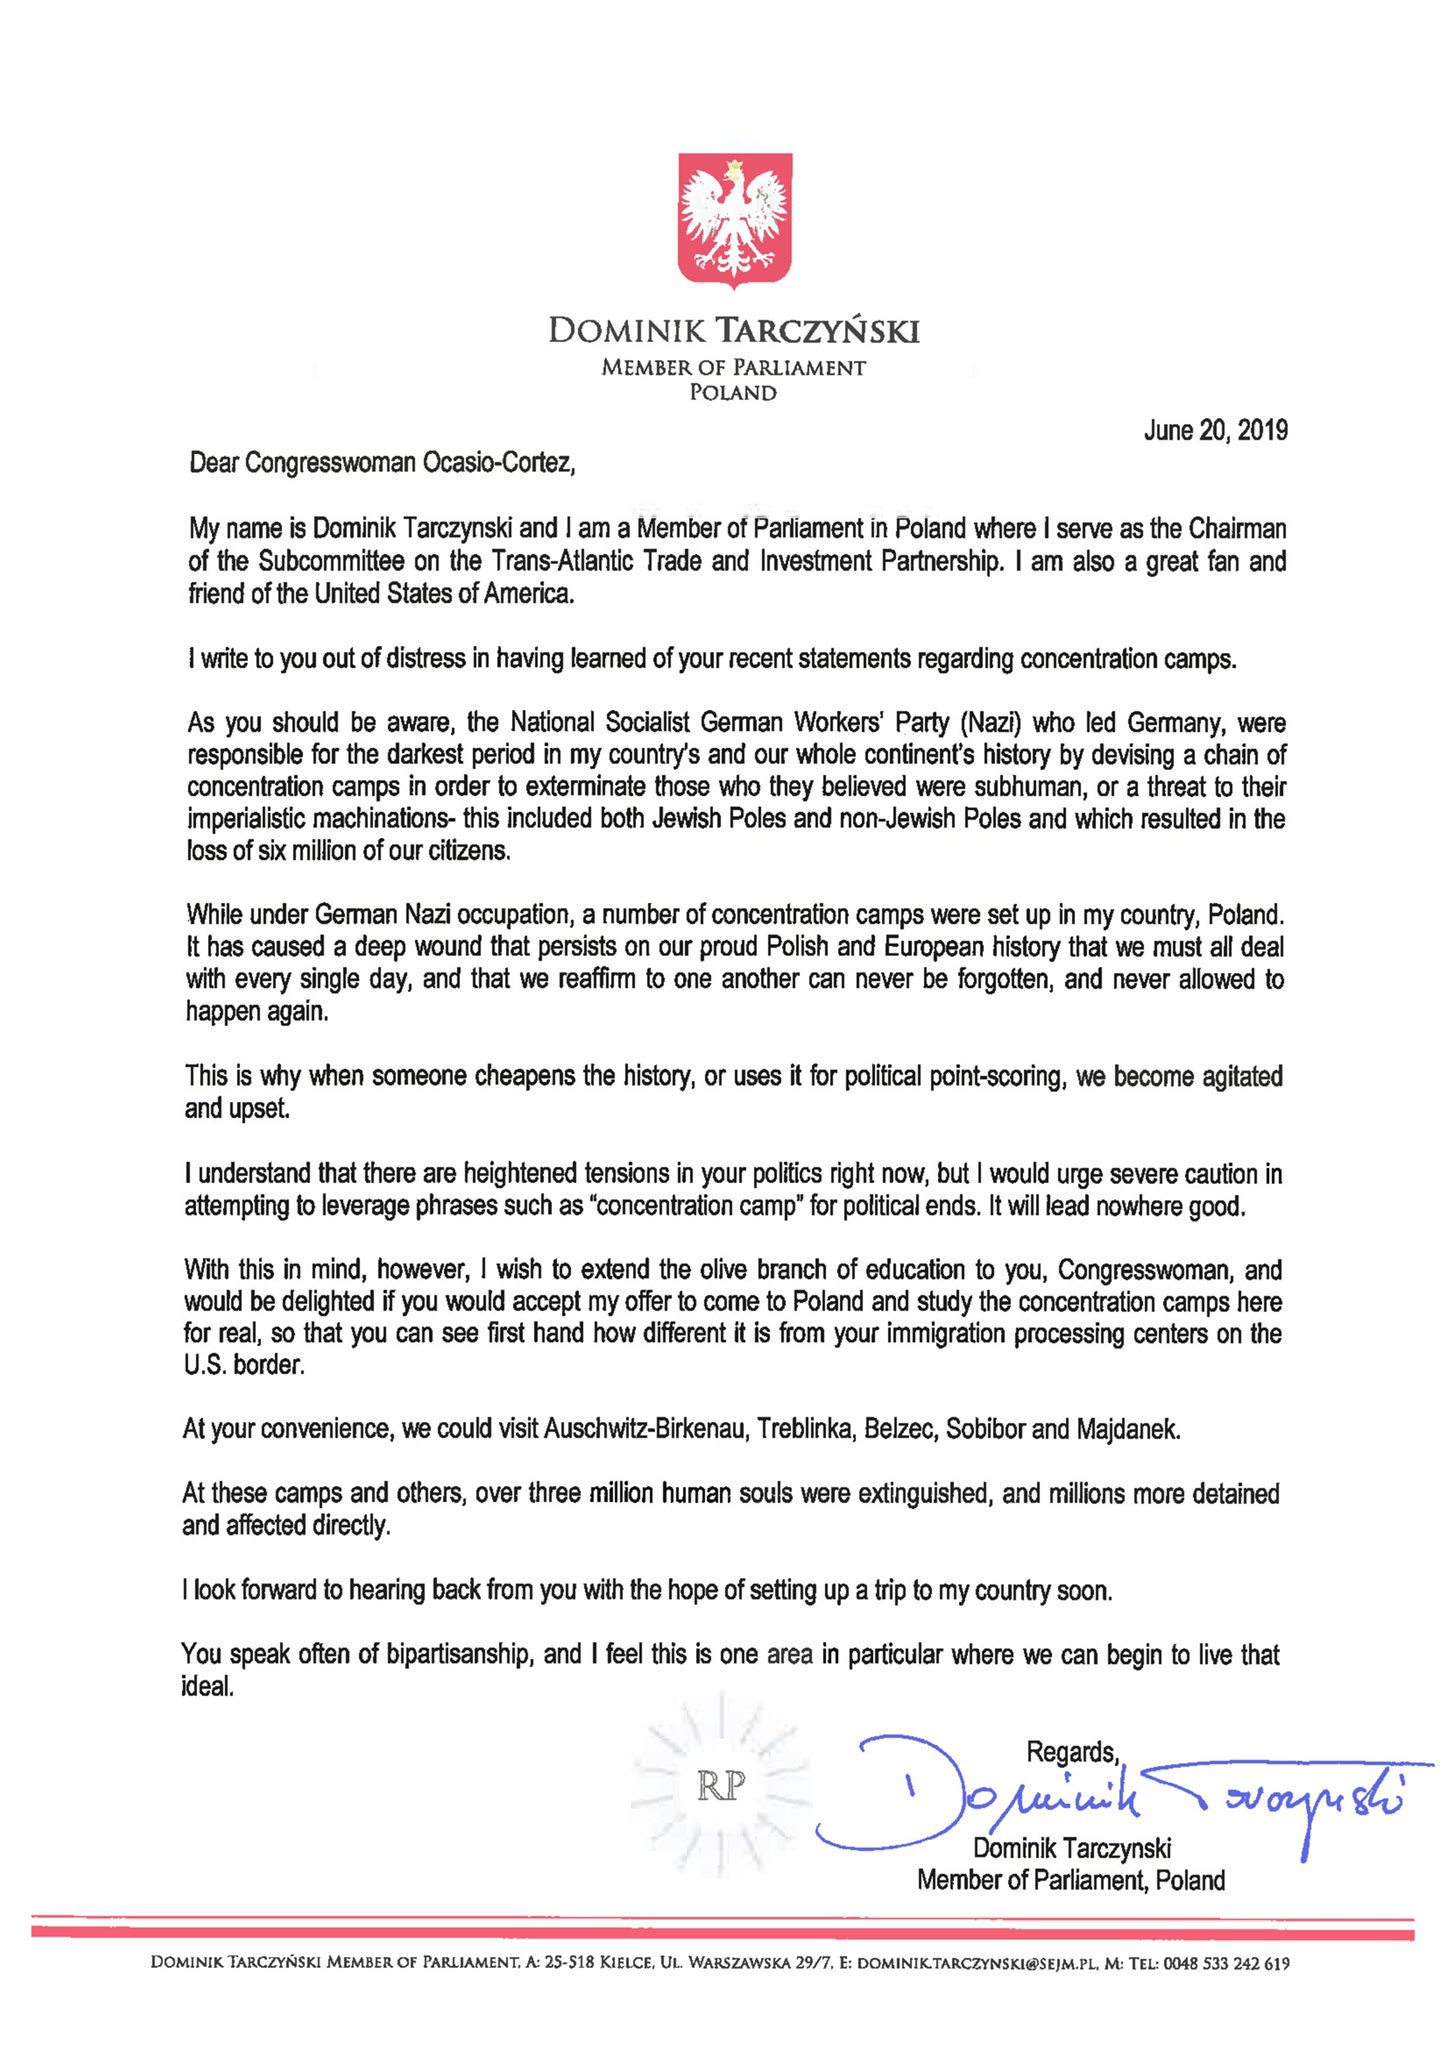 TARCZYŃSKI Dominik on Twitter: "With this letter, I am formally inviting @AOC to come to Poland,where Adolf Hitler set up the worst chain of concentration camps the world has ever seen, so that she may see that scoring political points with enflamed rhetoric is unacceptable in our contemporary Western societies… https://t.co/91Q9NzJWKg"